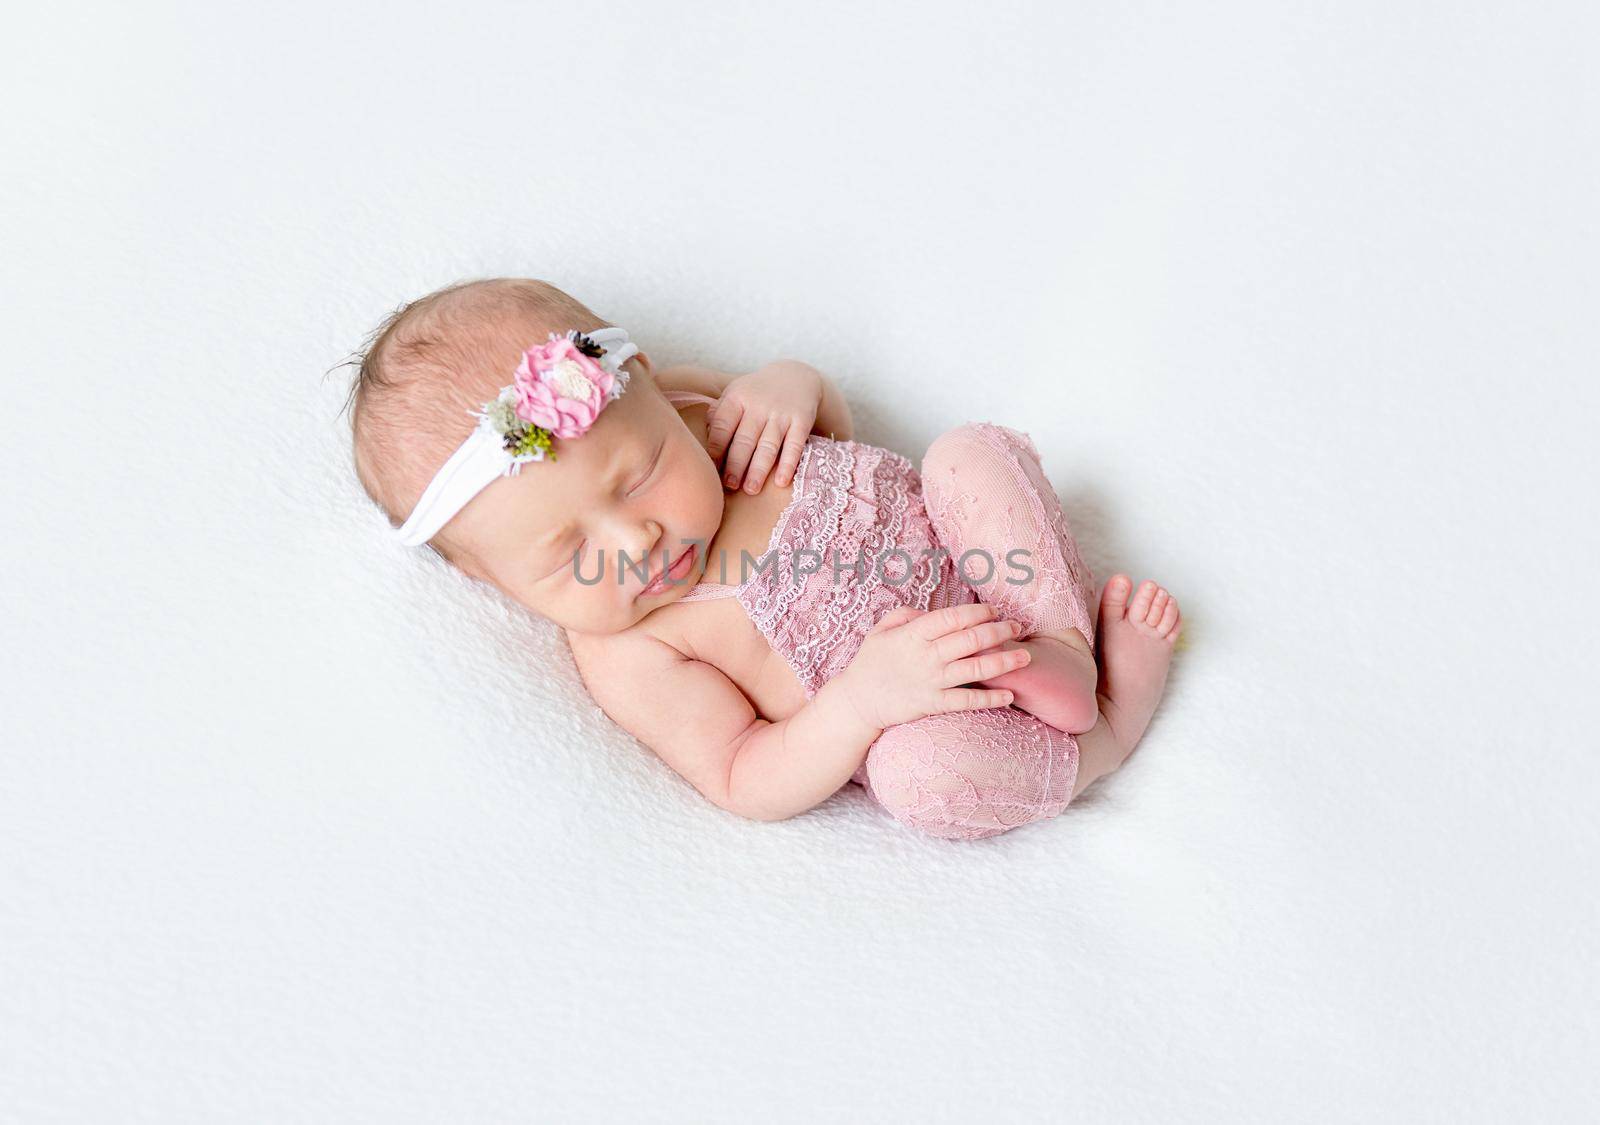 Adorable baby resting in a funny pose, dressed in a pink laced costume